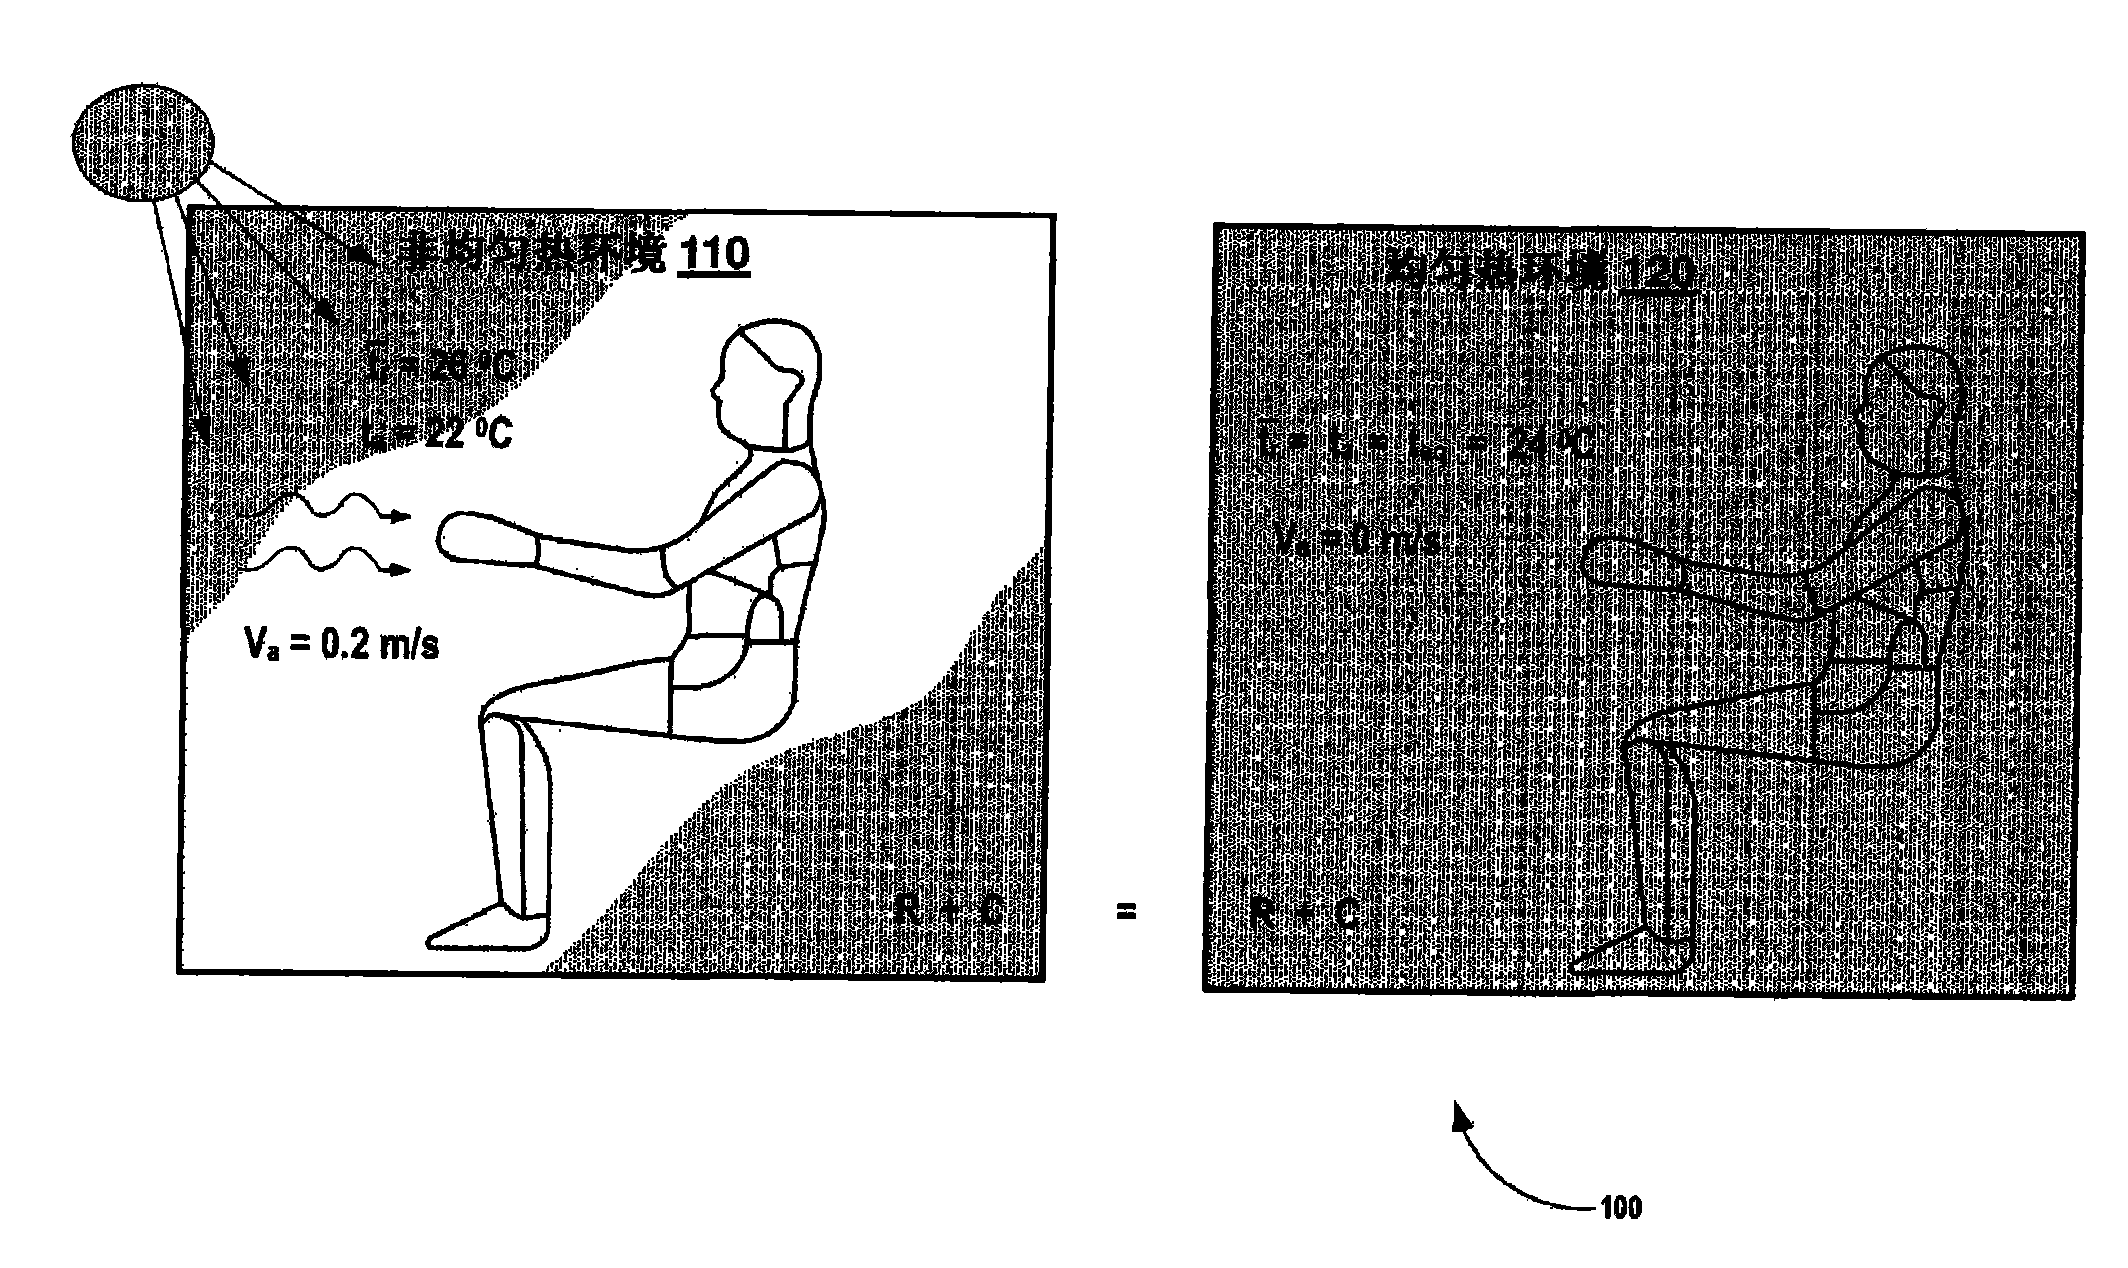 System and method for numerically evaluating thermal comfort inside an enclosure